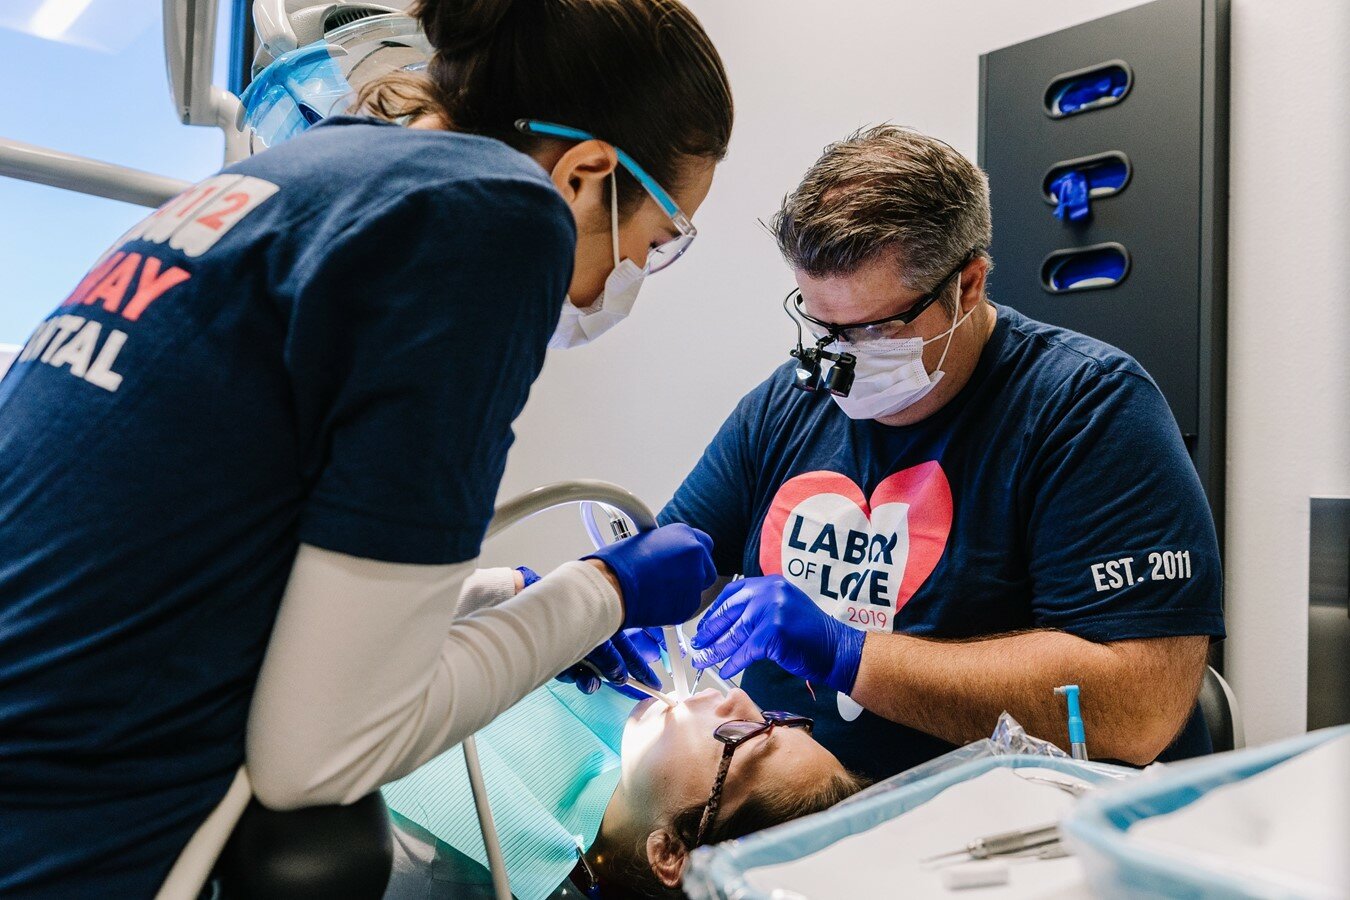 For the 12th year, Risas Dental and Braces is offering free dental care at almost all Valley locations on Labor Day.